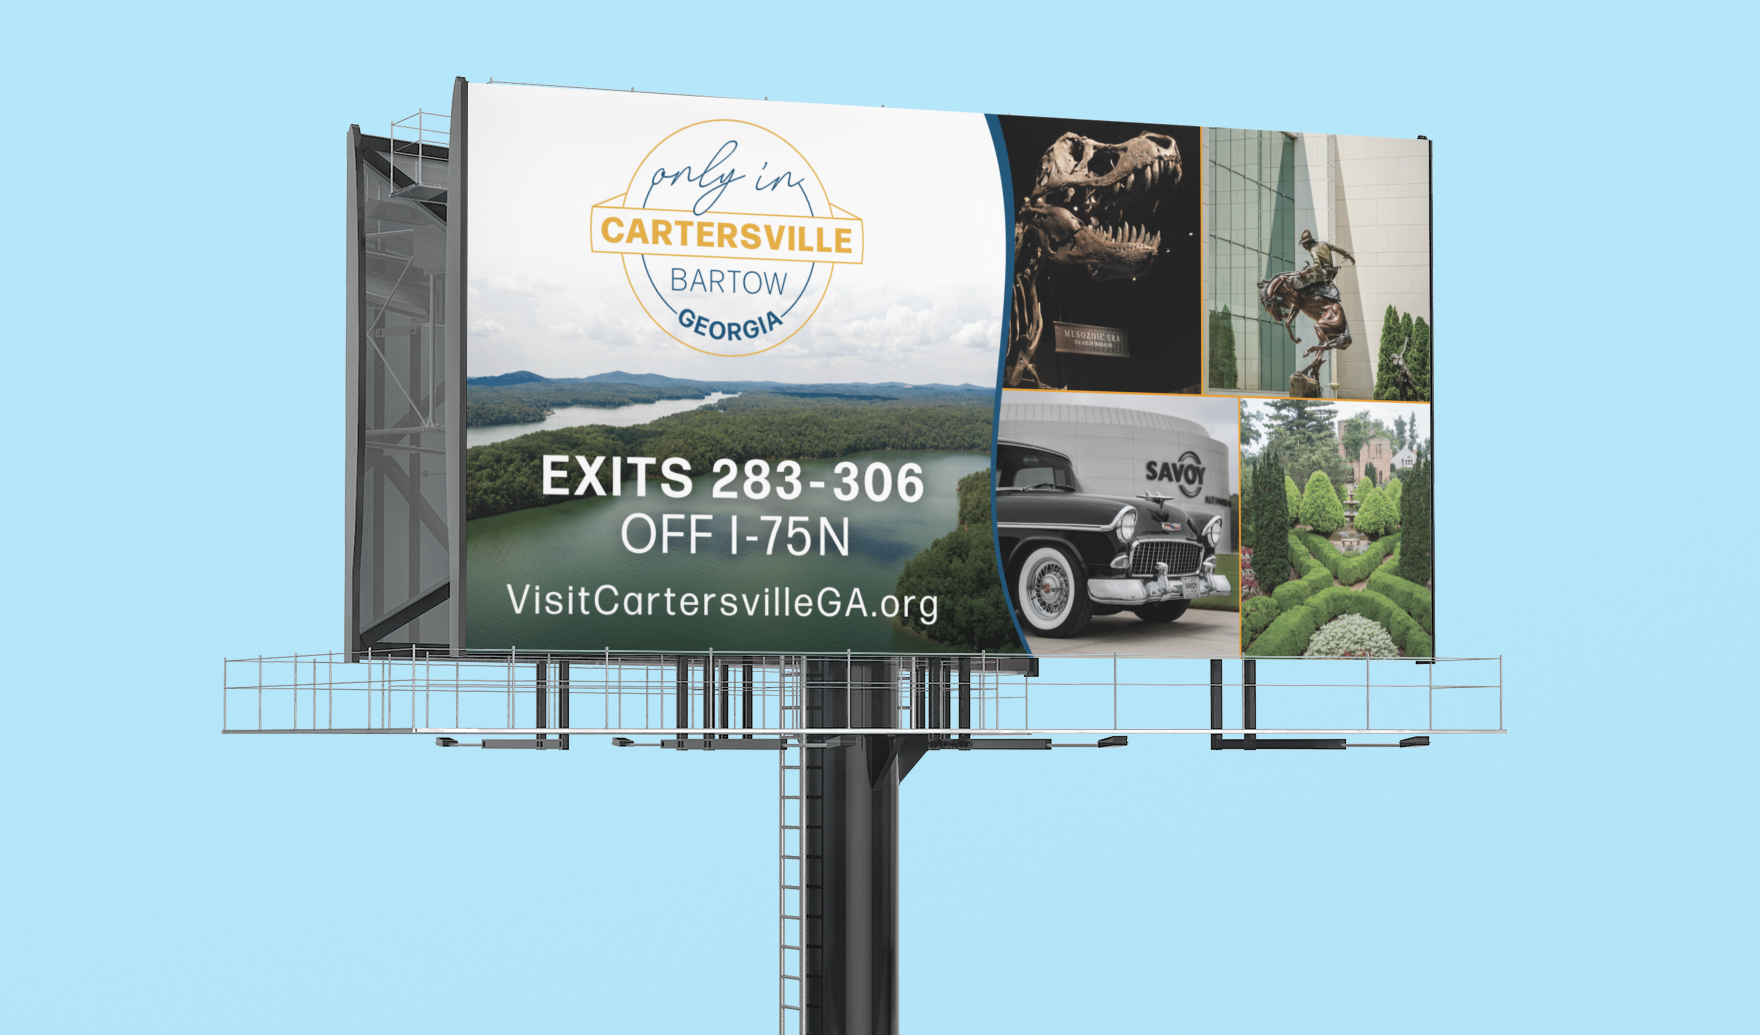 Billboard Design for Only in Cartersville Bartow, CVB by Lara J Designs / Custom Graphic Design / Website Design / Logo Design / Branding / Custom Illustration / Logo & Visual Identity / Print Collateral / Product Packaging / Business Cards / Brochures / Websites / Flyers / Postcards / Invitations / T-shirts / Cartersville Georgia / Bartow County Georgia / North Georgia / Historic Downtown Cartersville